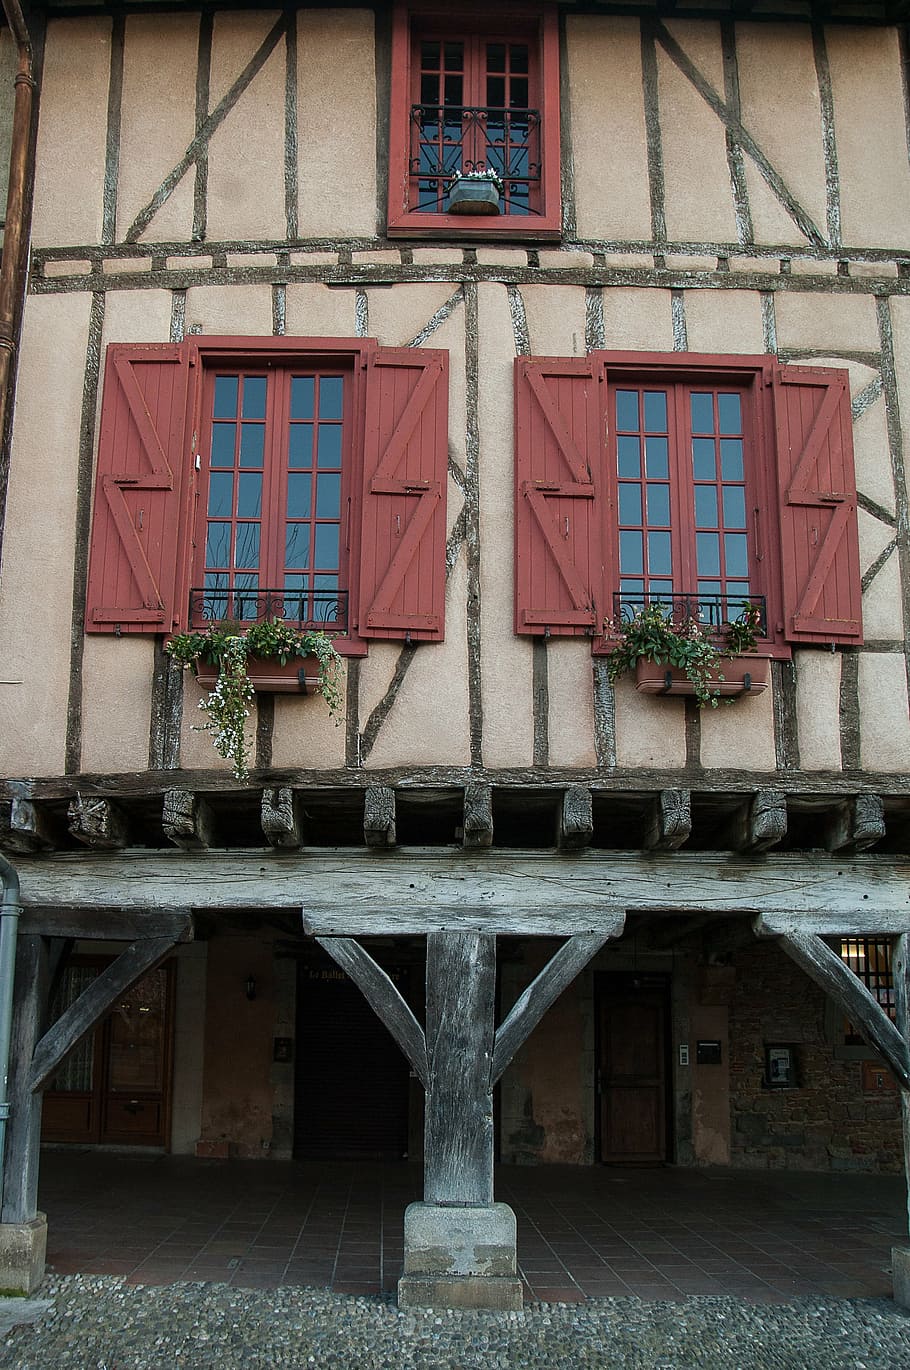 france, mirepoix, timbered houses, arcades, south of france, architecture, built structure, building exterior, window, building